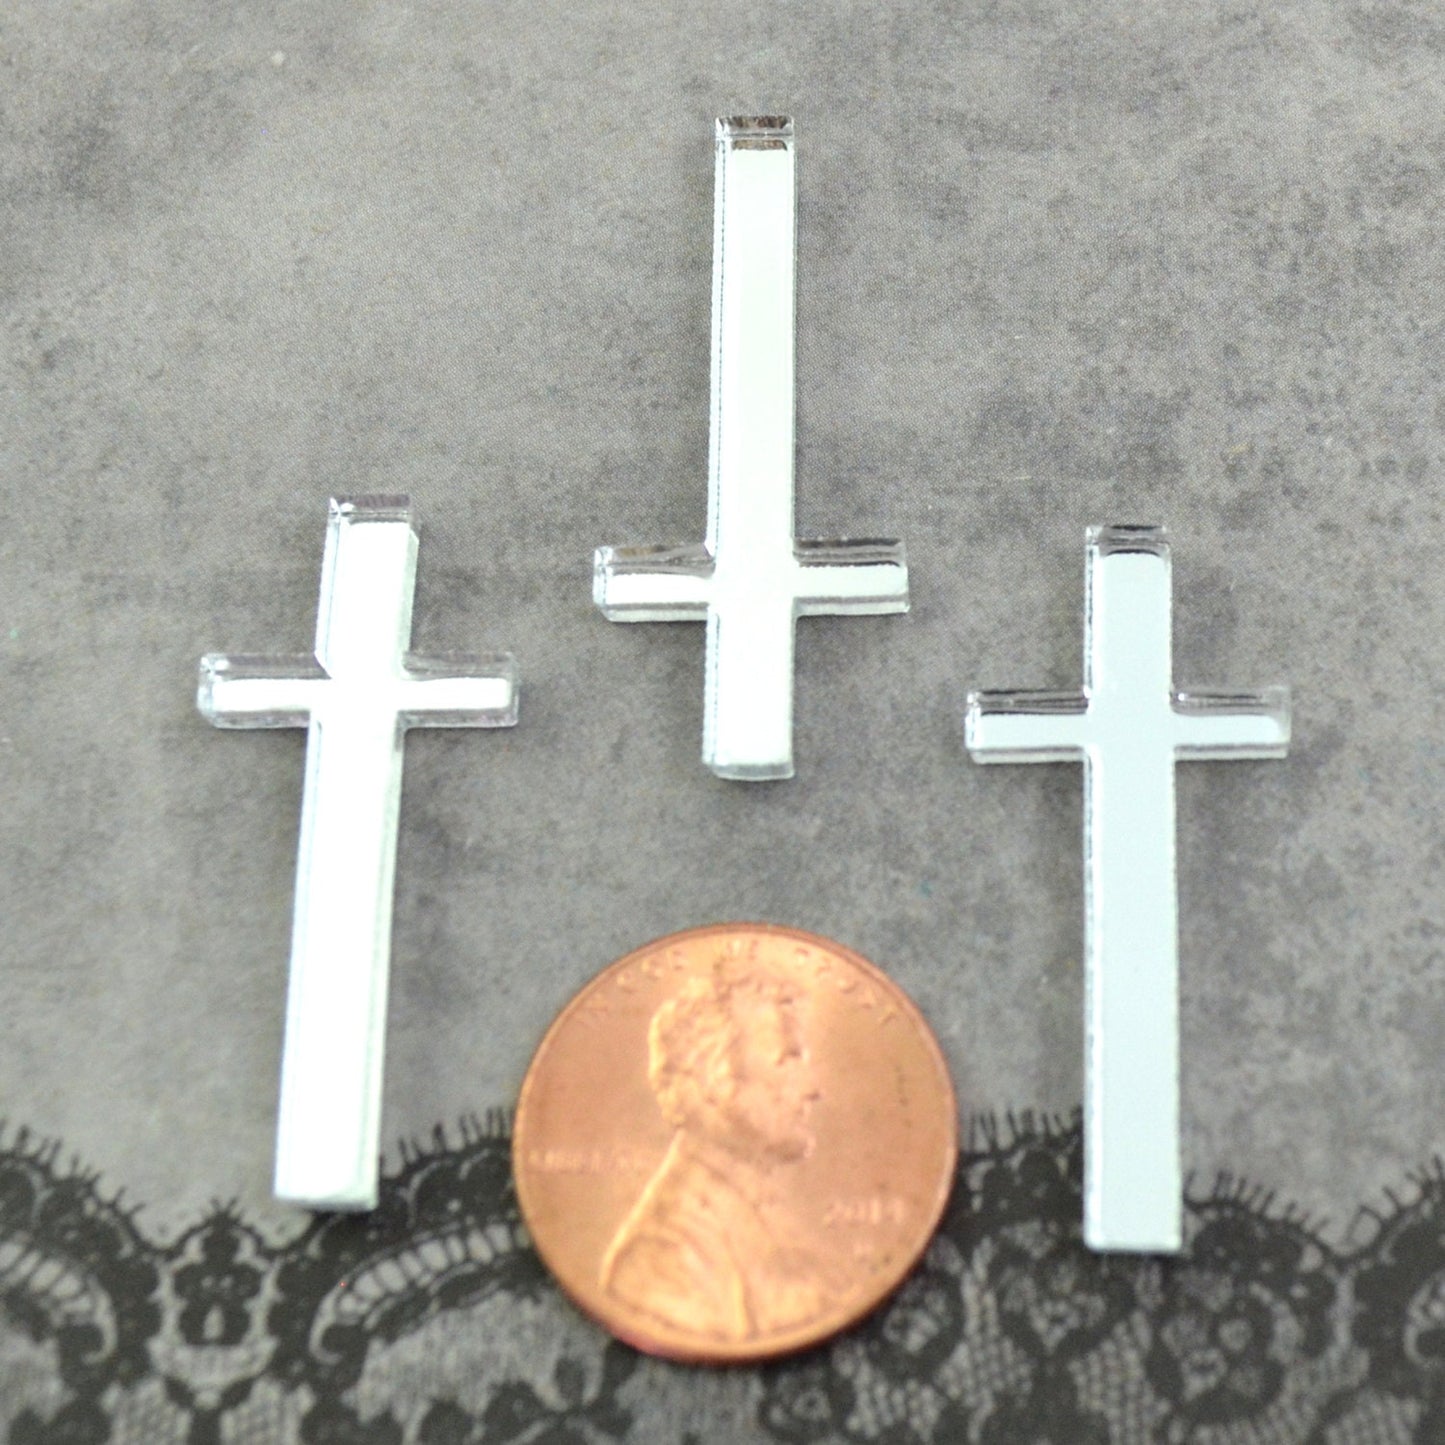 SILVER CROSS CABOCHONS 3 Flat Back Cabs in Silver Mirrored Laser Cut Acrylic